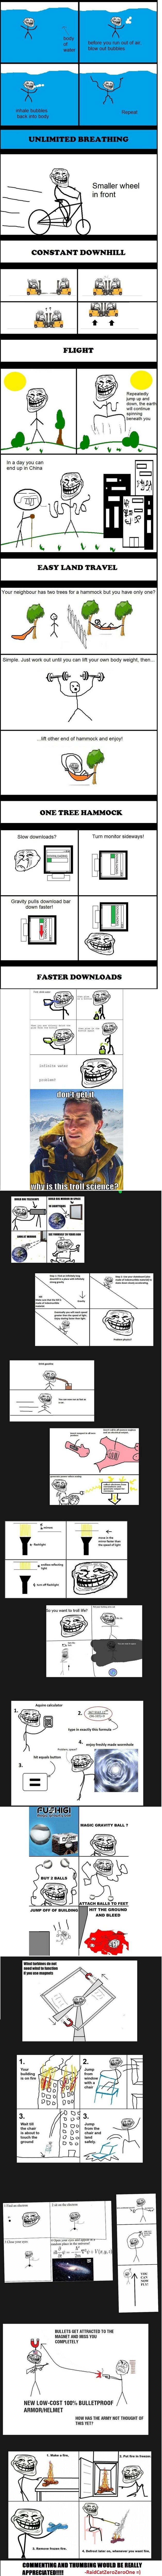 Troll Physics Compilation. .. i was going to say repost but then i realized it was your own content